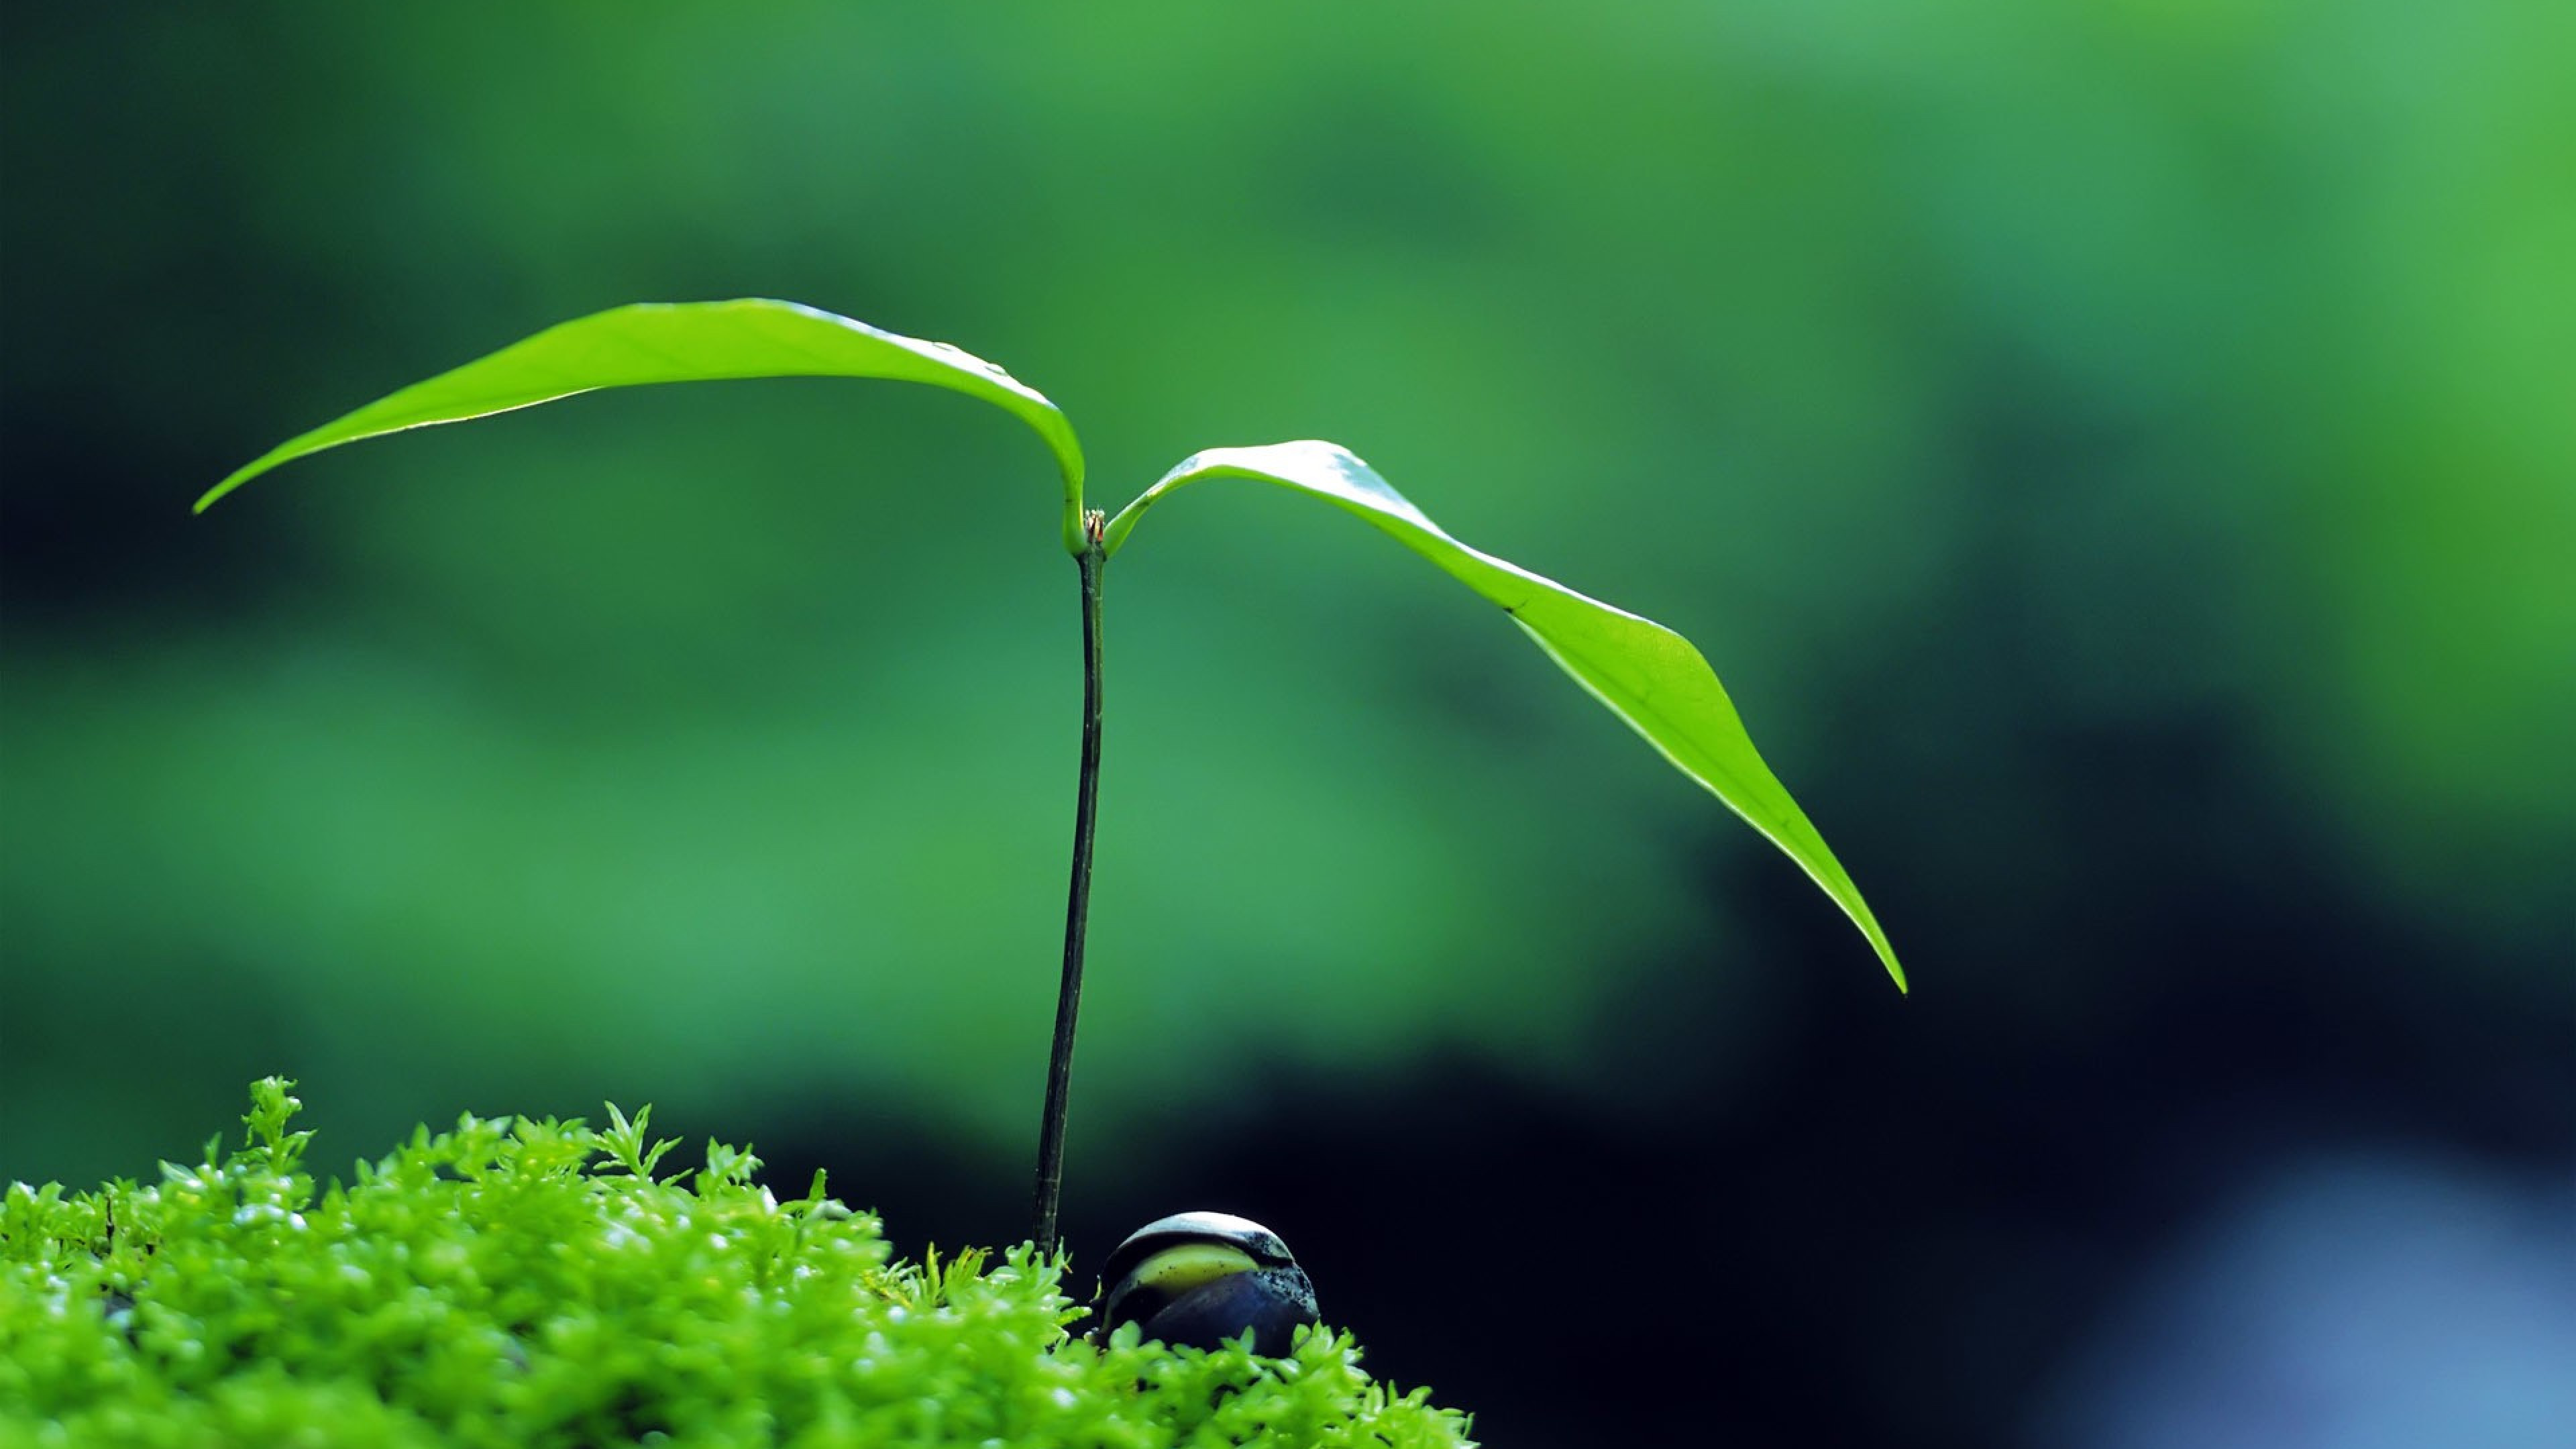 41 Plant Wallpapers, Hd Quality Plant Images, Plant - Green Zen - 3840x2160  Wallpaper 